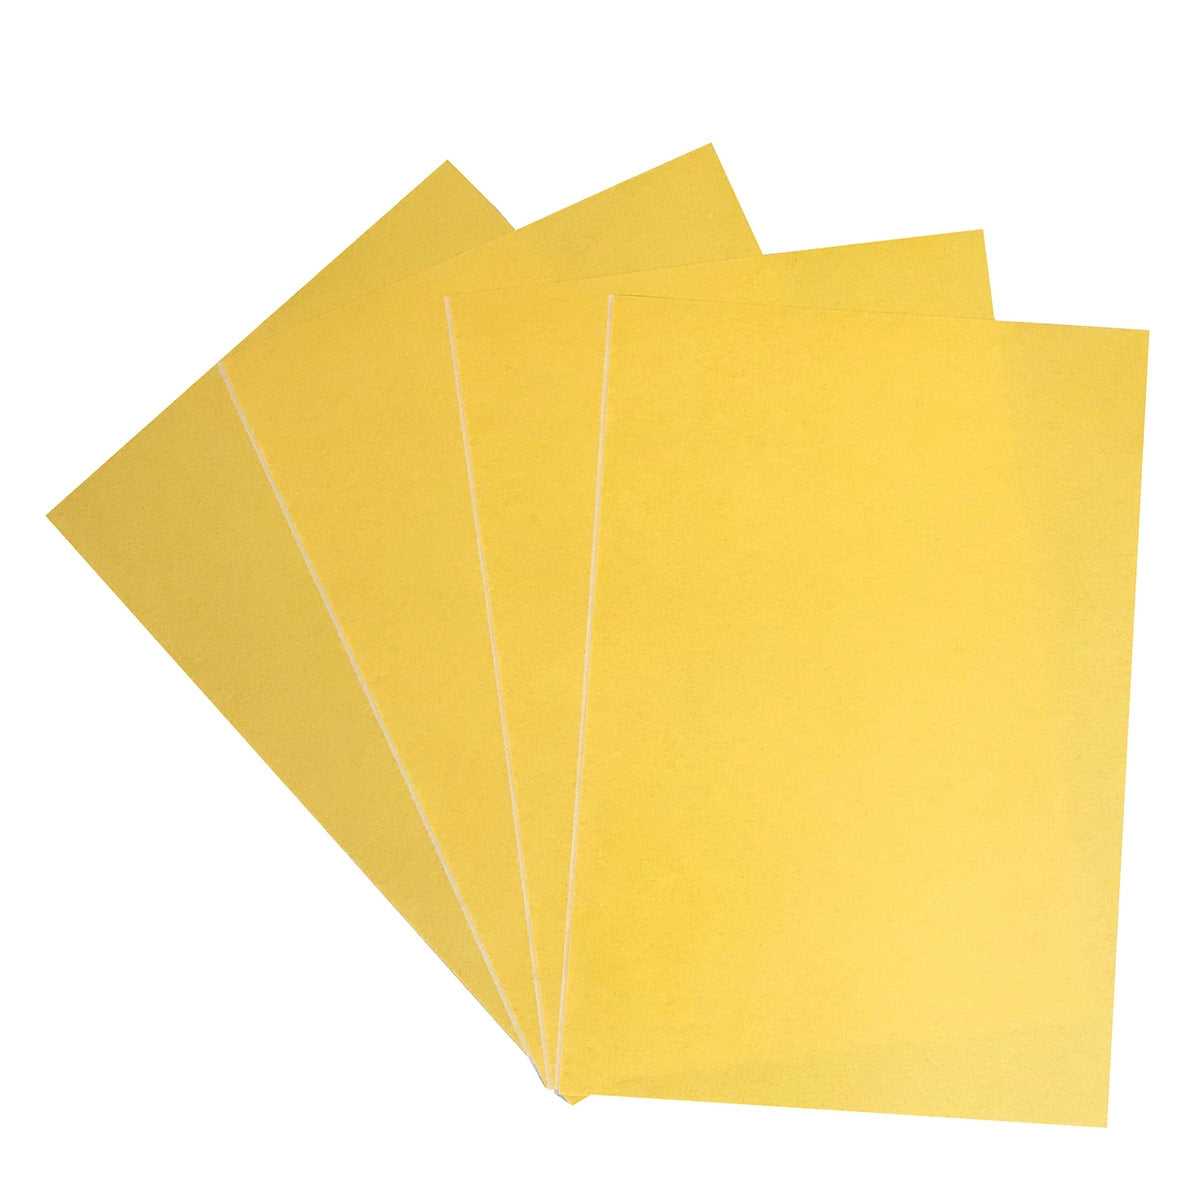 Airplac - Foamboard Permanent Glue Dot Sheets - 4 Pack